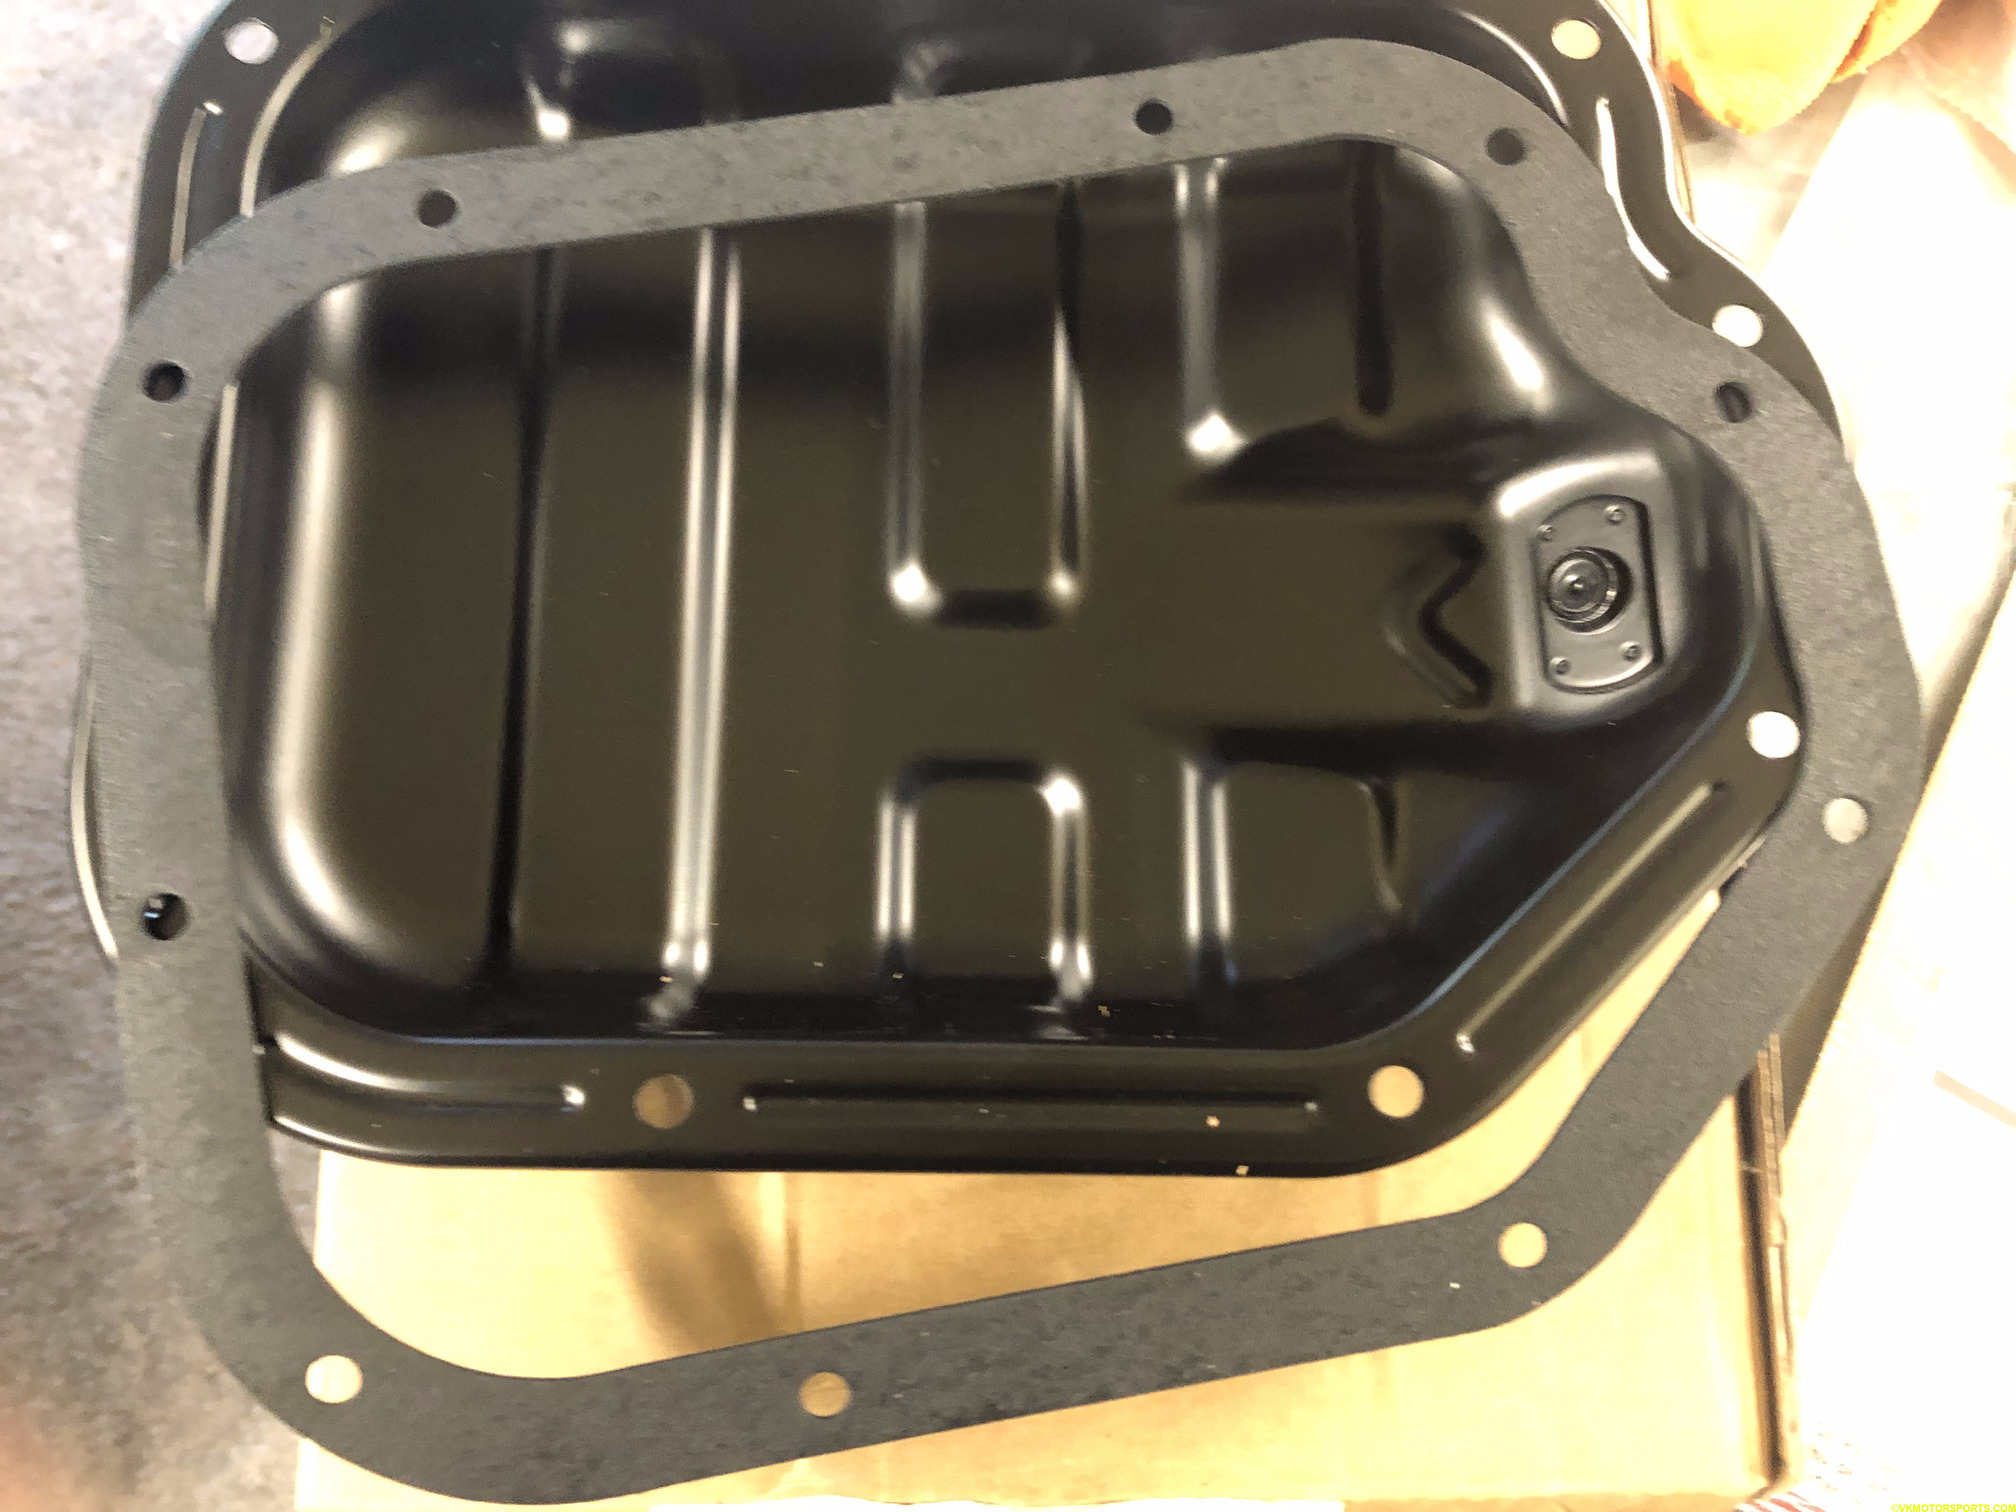 Figure 3. New Oil Pan and Gasket